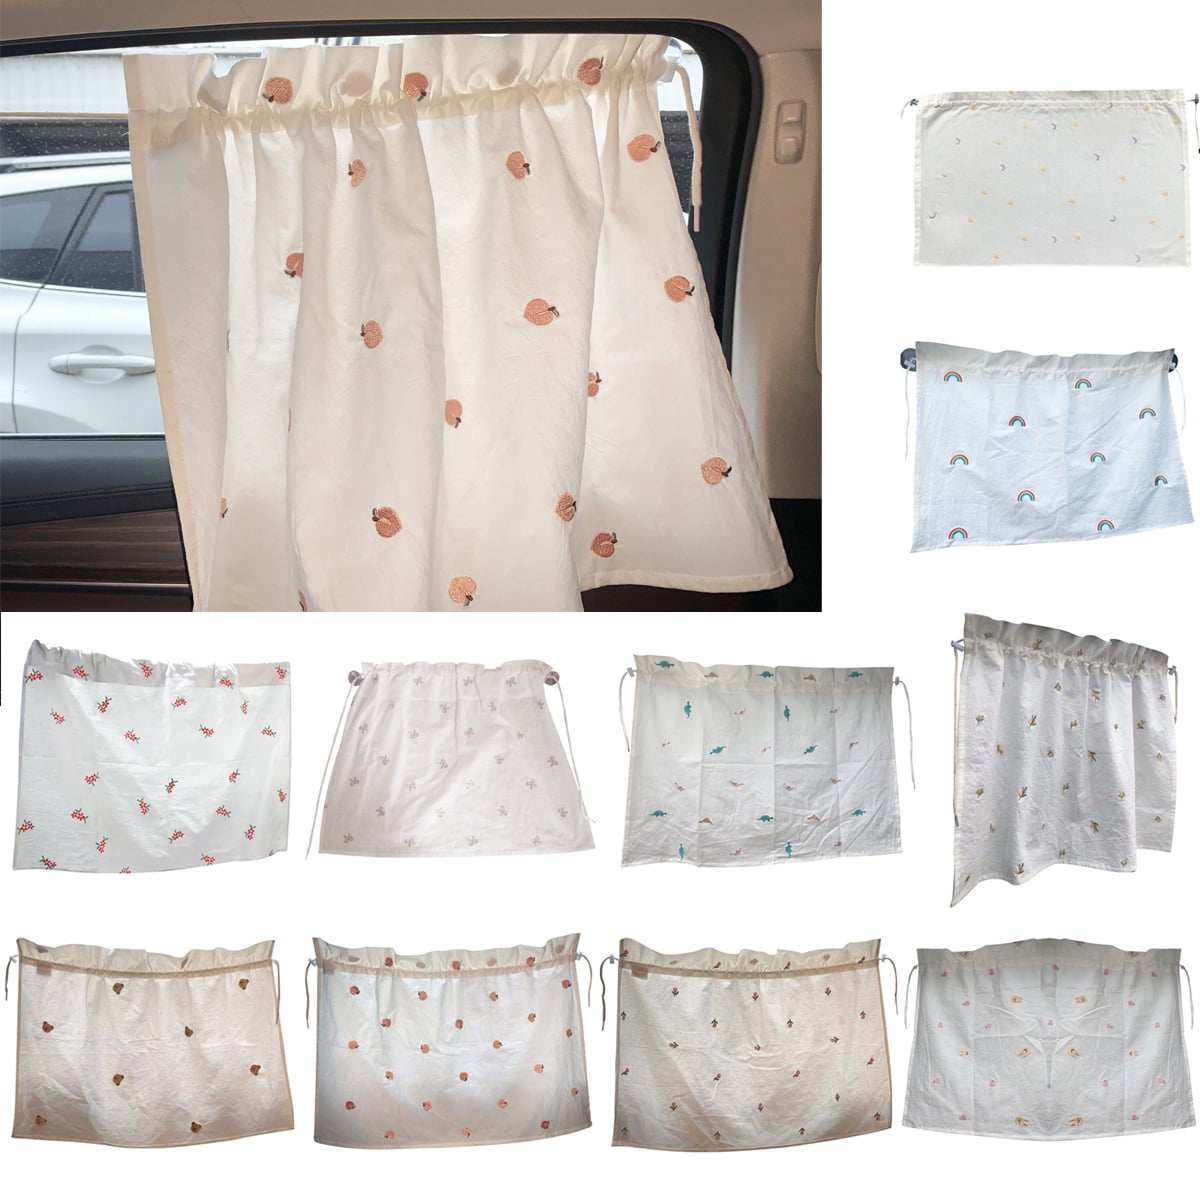 Car Divider Curtains Front Rear Partition Sun Shade-privacy Travel